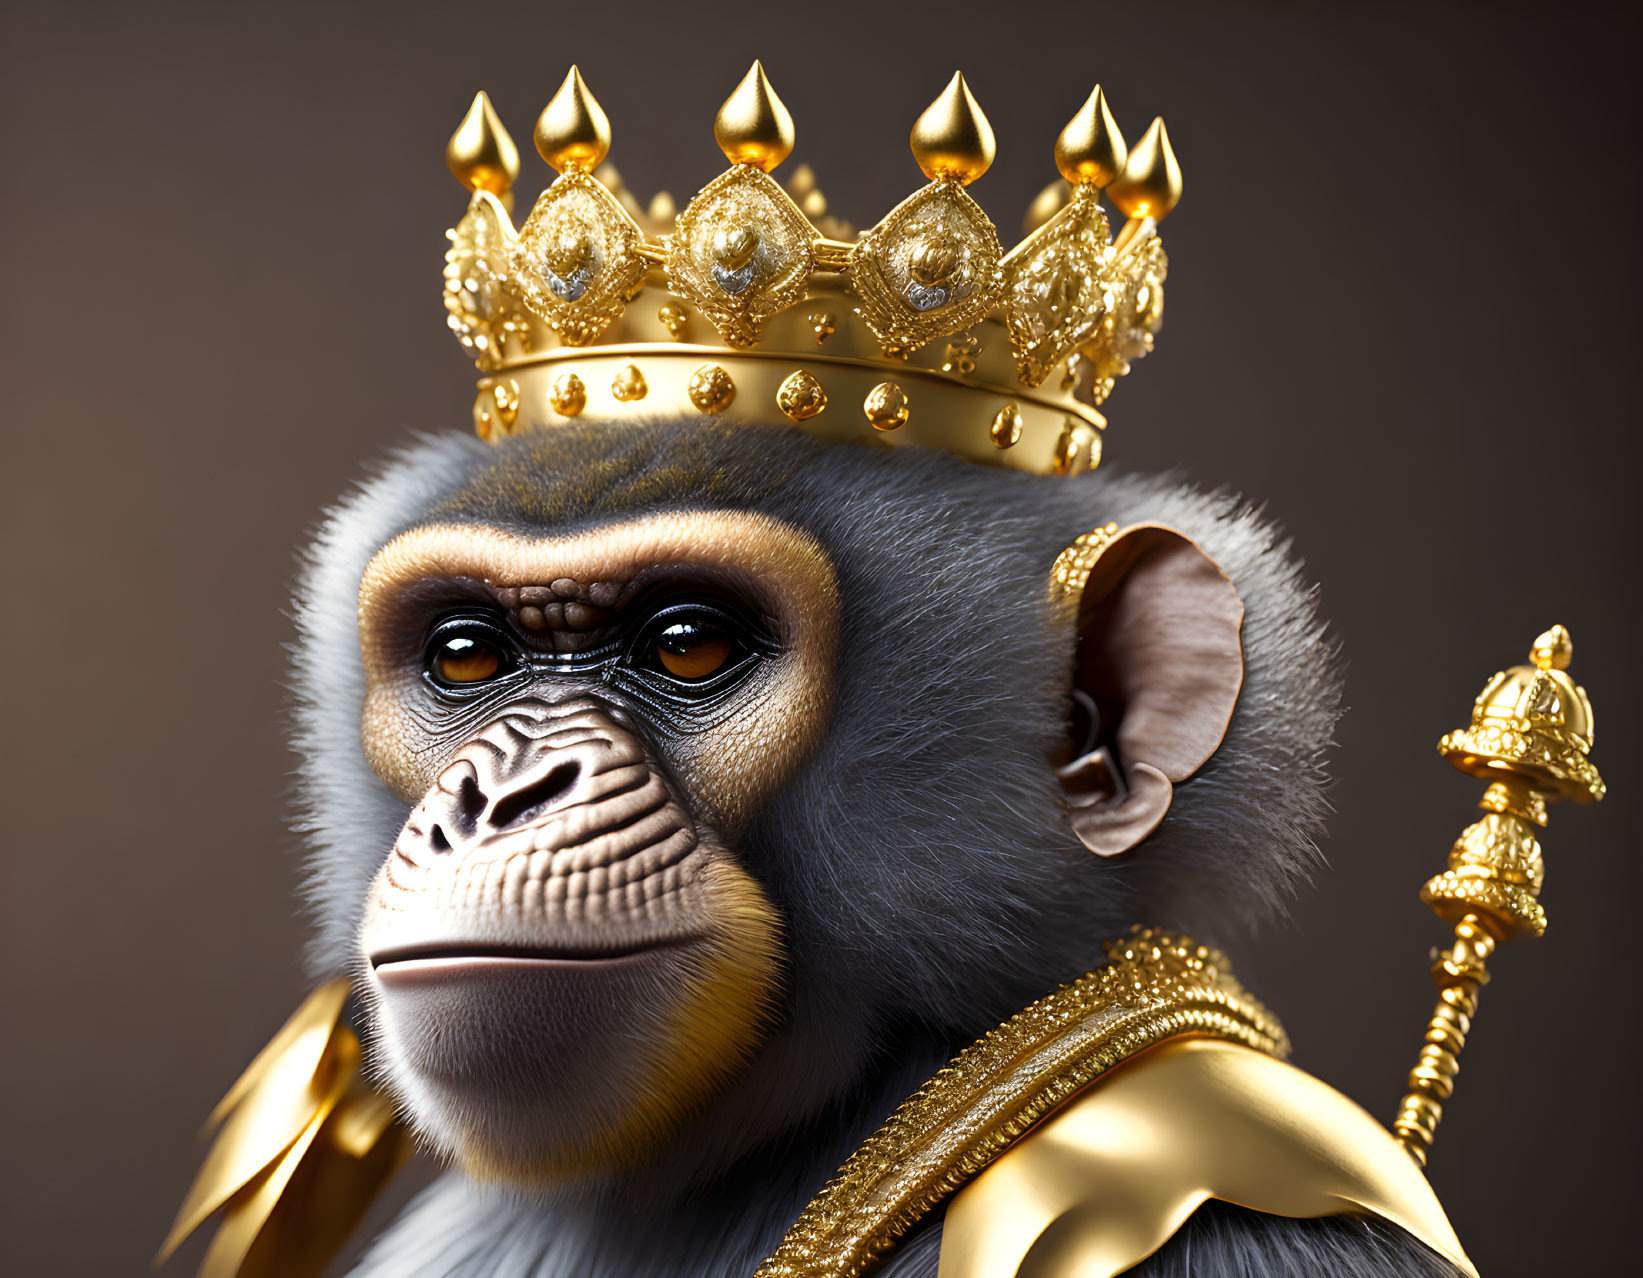 Realistic 3D illustration: Gorilla in golden crown and jewelry with scepter on brown background